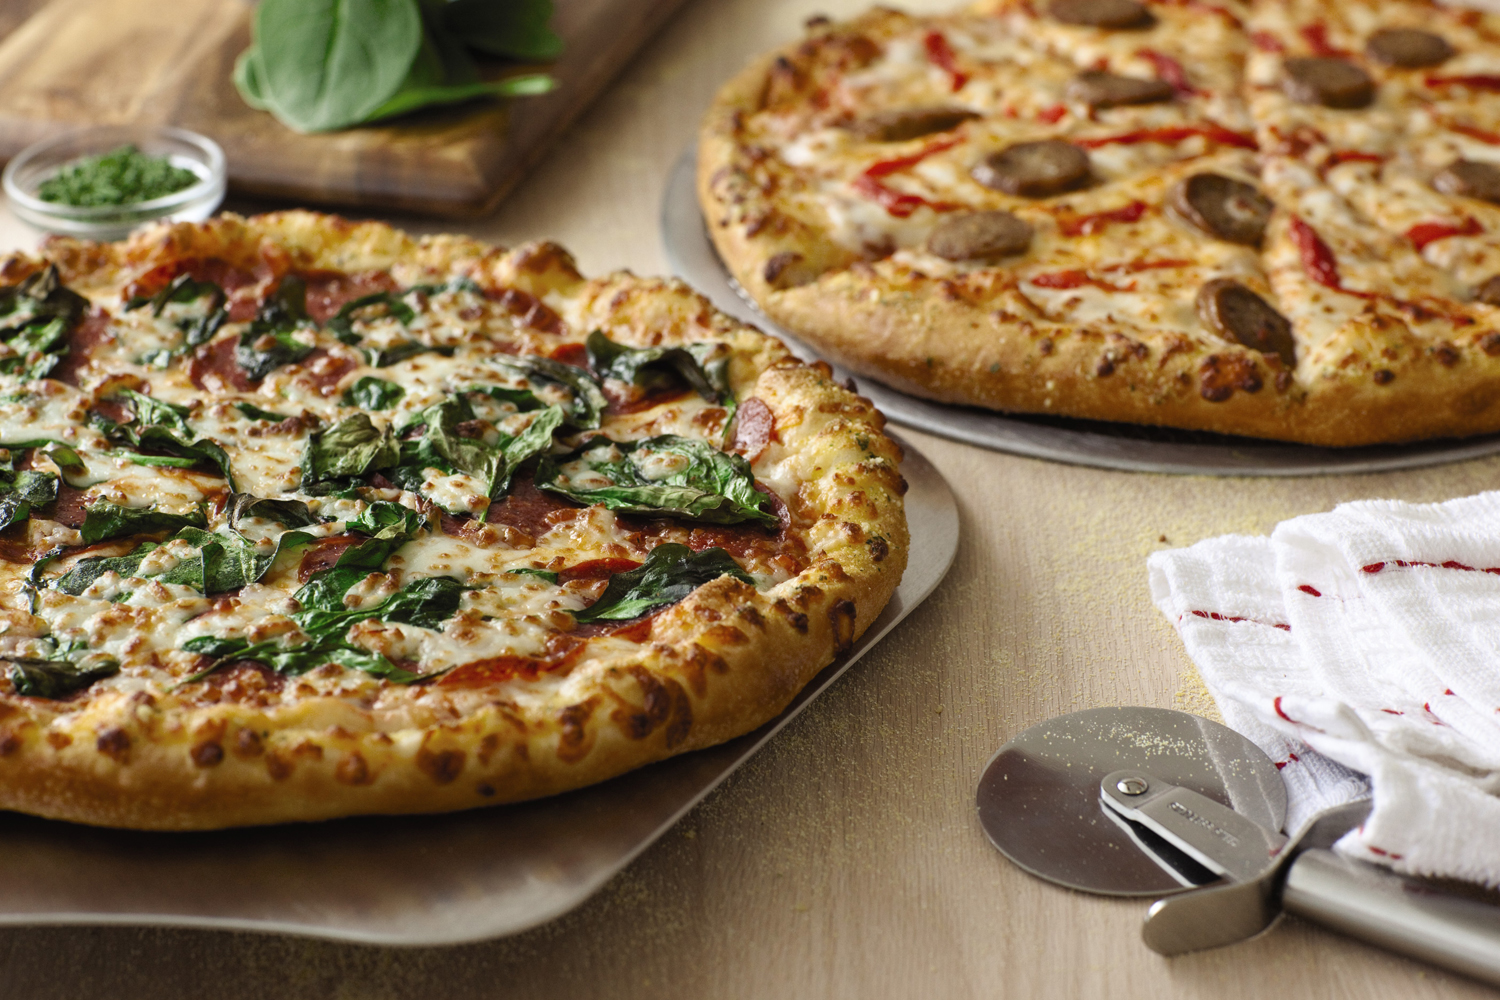 Domino’s: We’re an e-commerce company that sells pizza